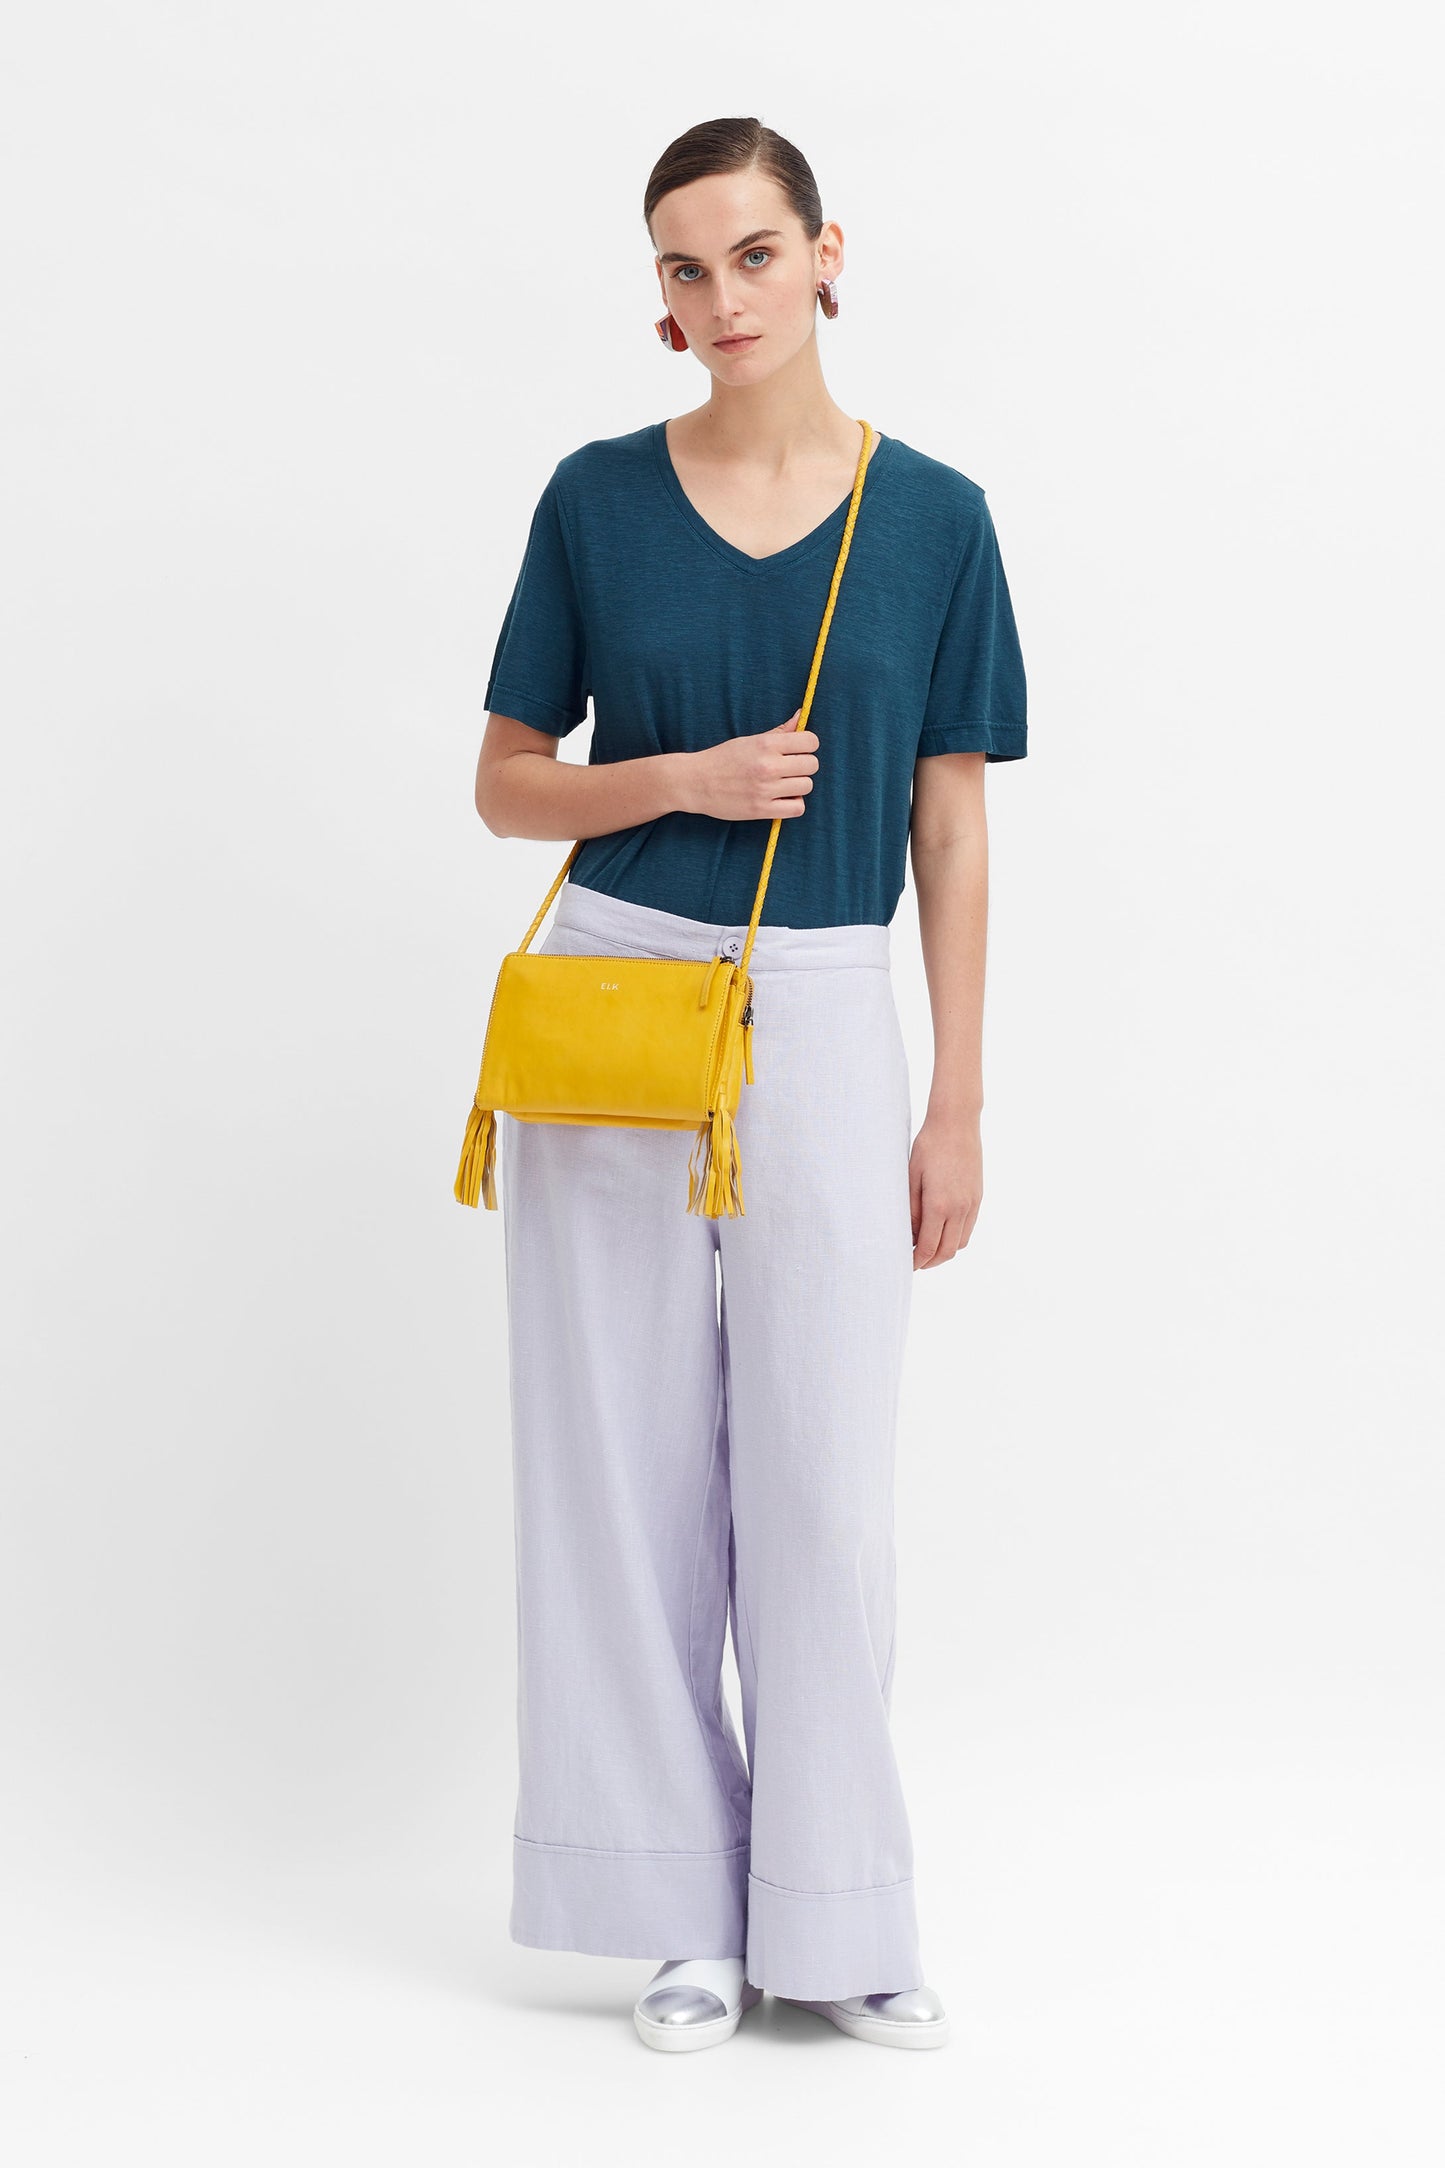 Kandis Remnant Leather Bag With Tassel Model | YELLOW